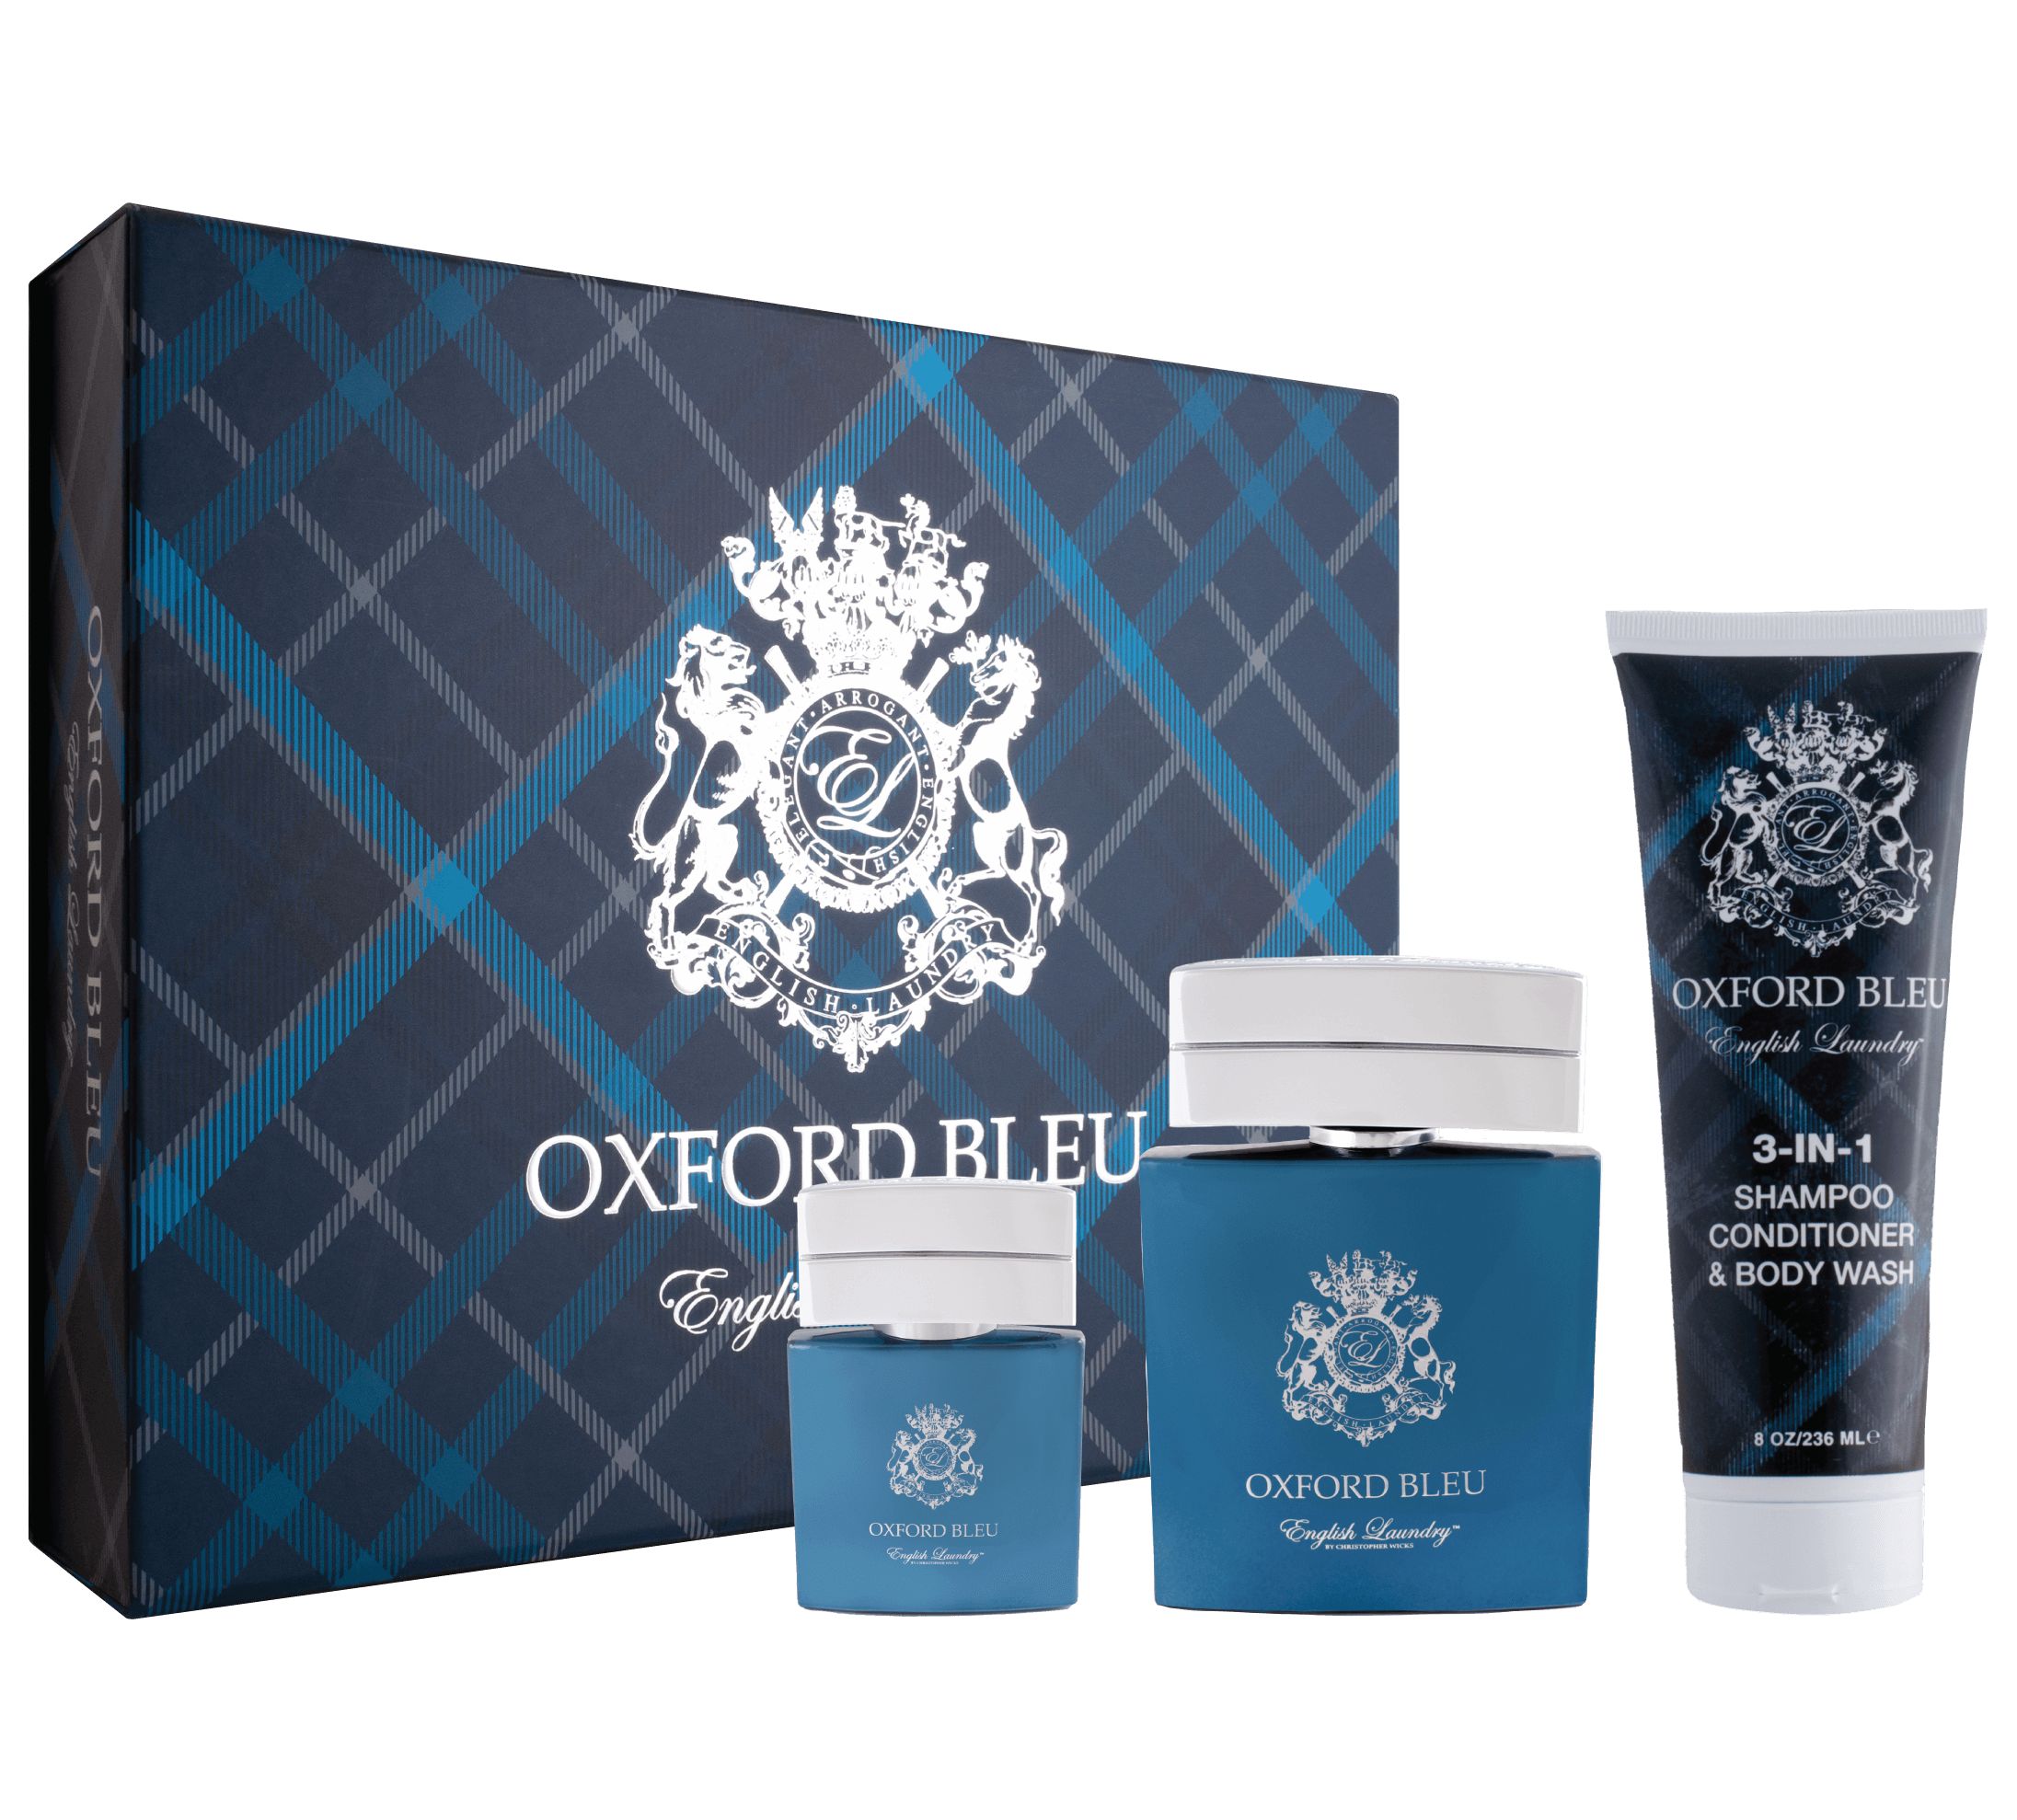 English Laundry Oxford Bleu for Him Gift Set for $95.00